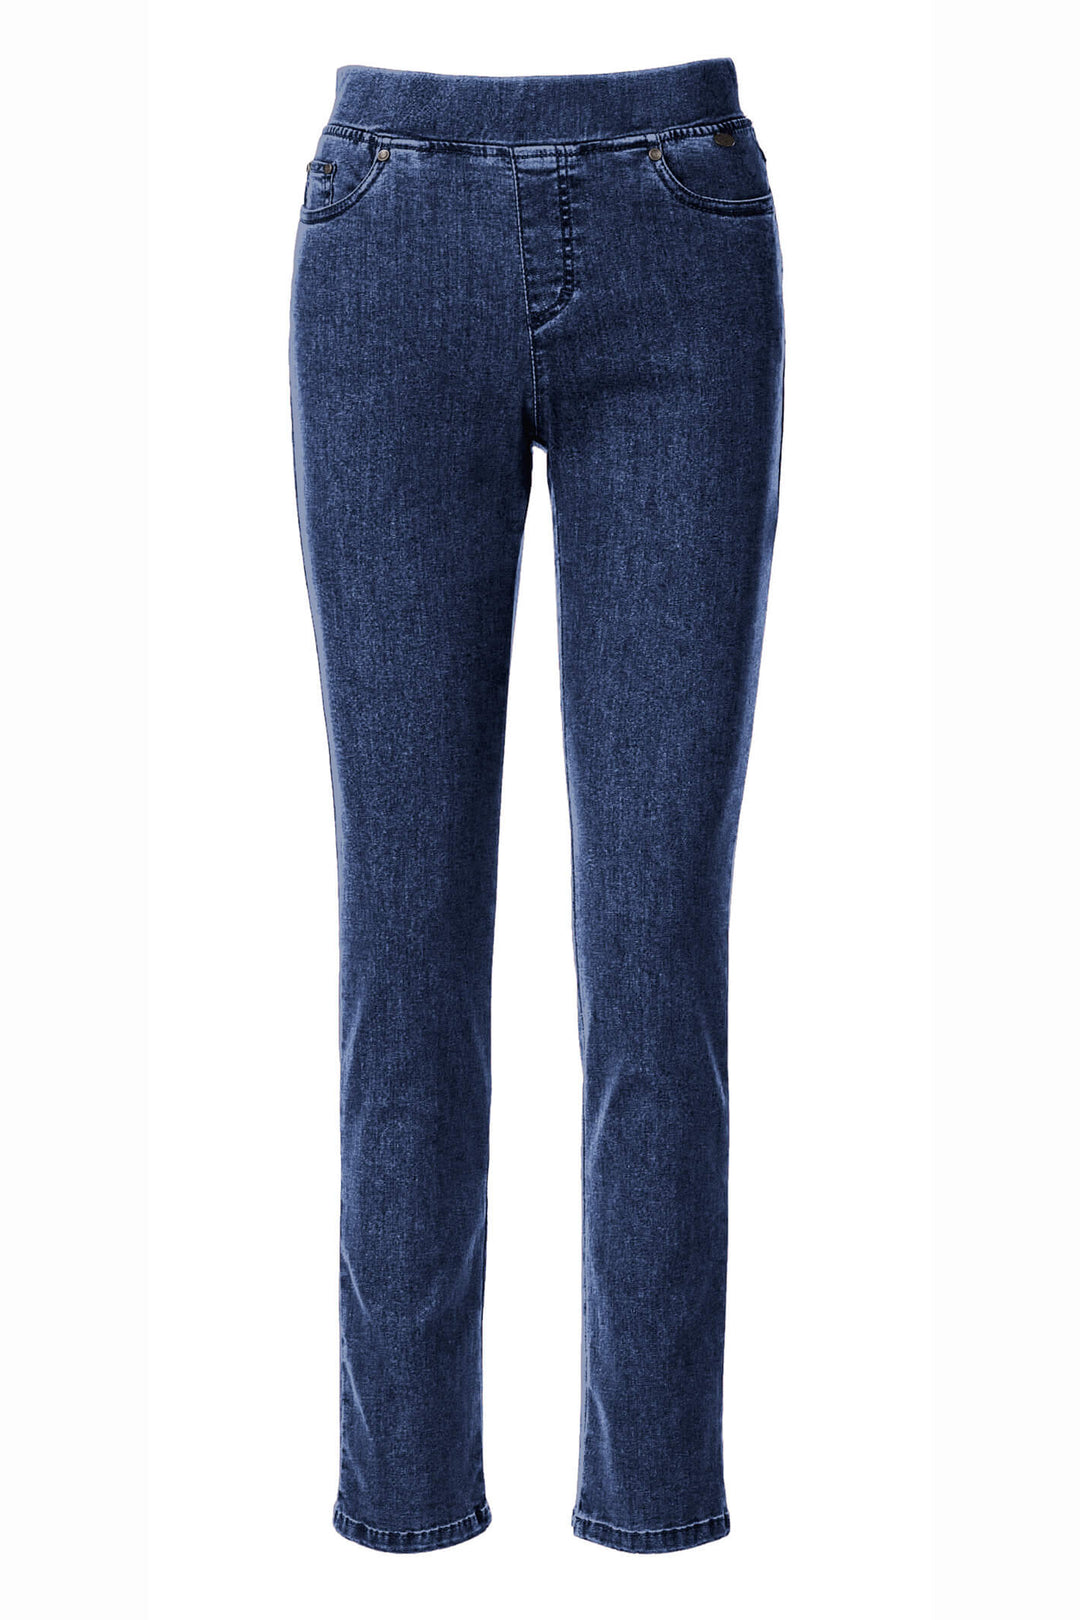 Anna Montana Angelika 1001 48 Stone Wash Slim Fit Pull-On Jeans - Shirley Allum Boutique